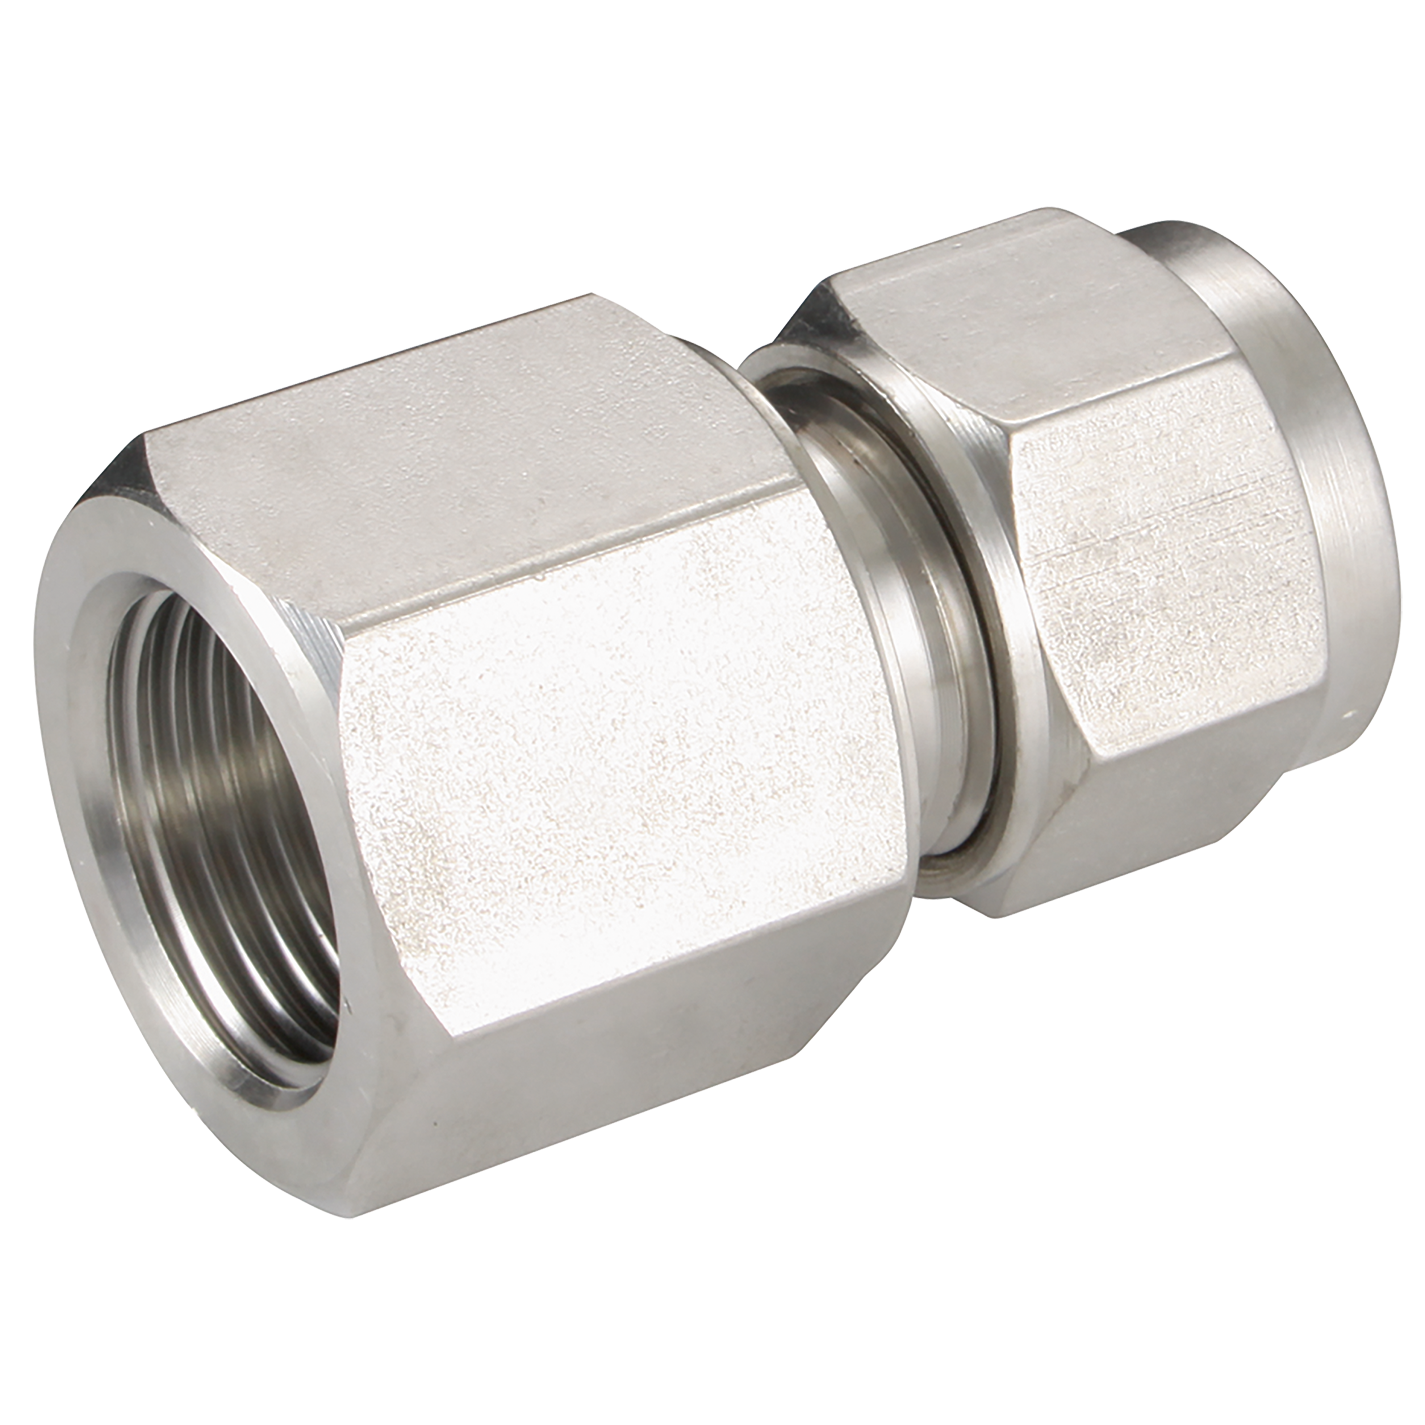 FEMALE CONNECTOR 10 OD 1/2 BSPP